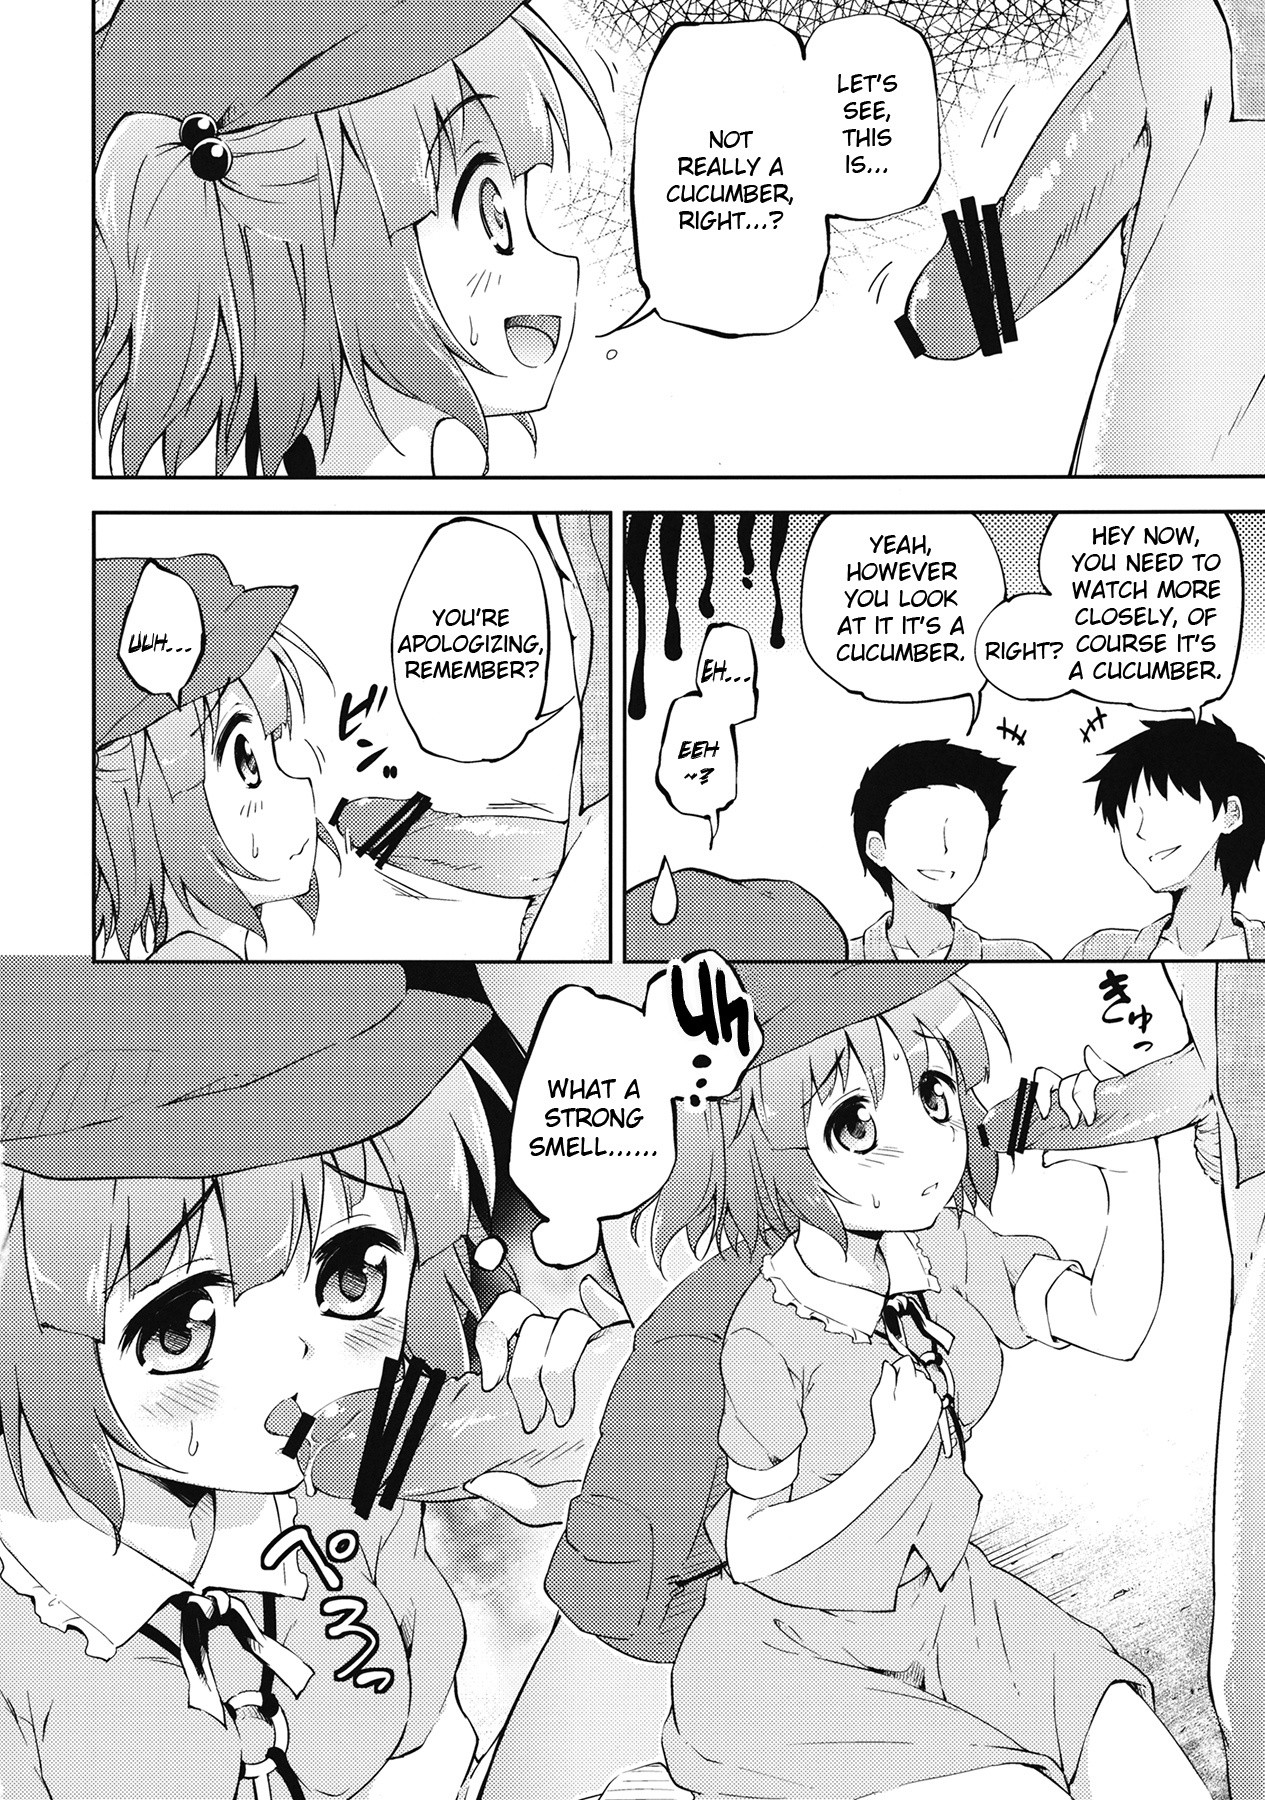 Cucumber Sommelier hentai manga picture 5